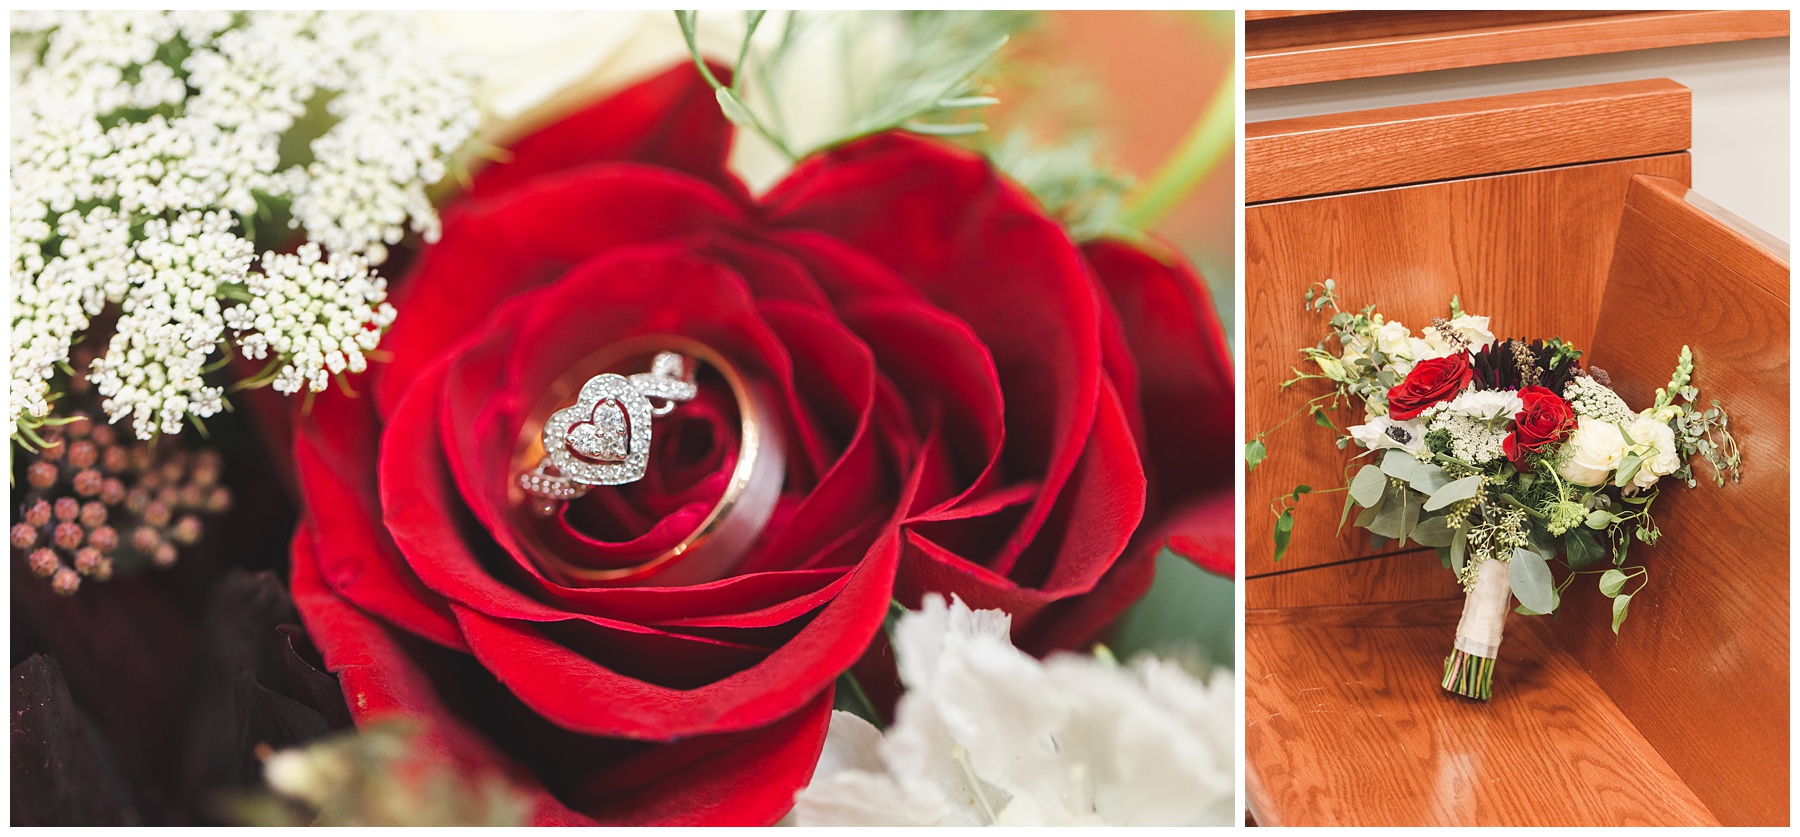 Courthouse wedding in Boise, Idaho red rose with heart-shaped diamond ring